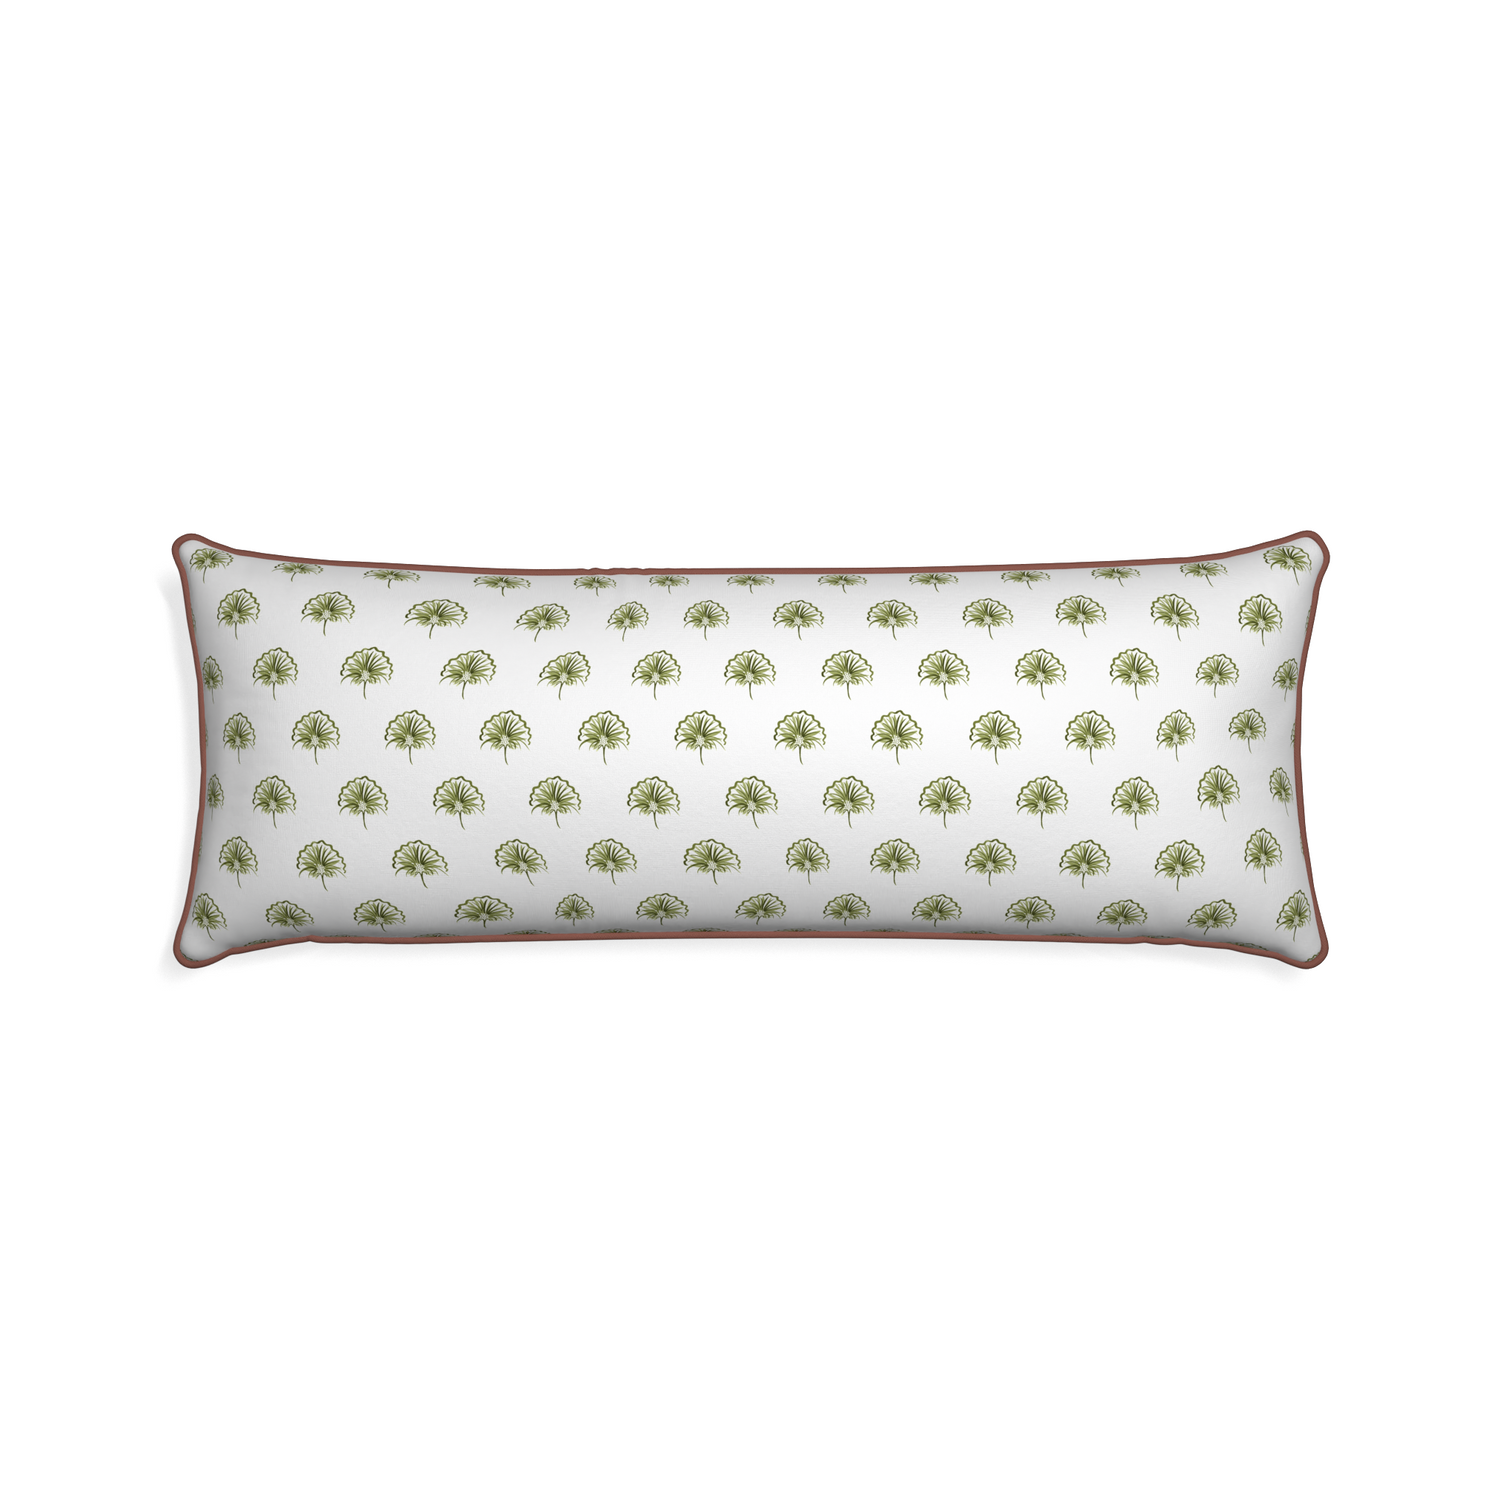 Xl-lumbar penelope moss custom pillow with w piping on white background